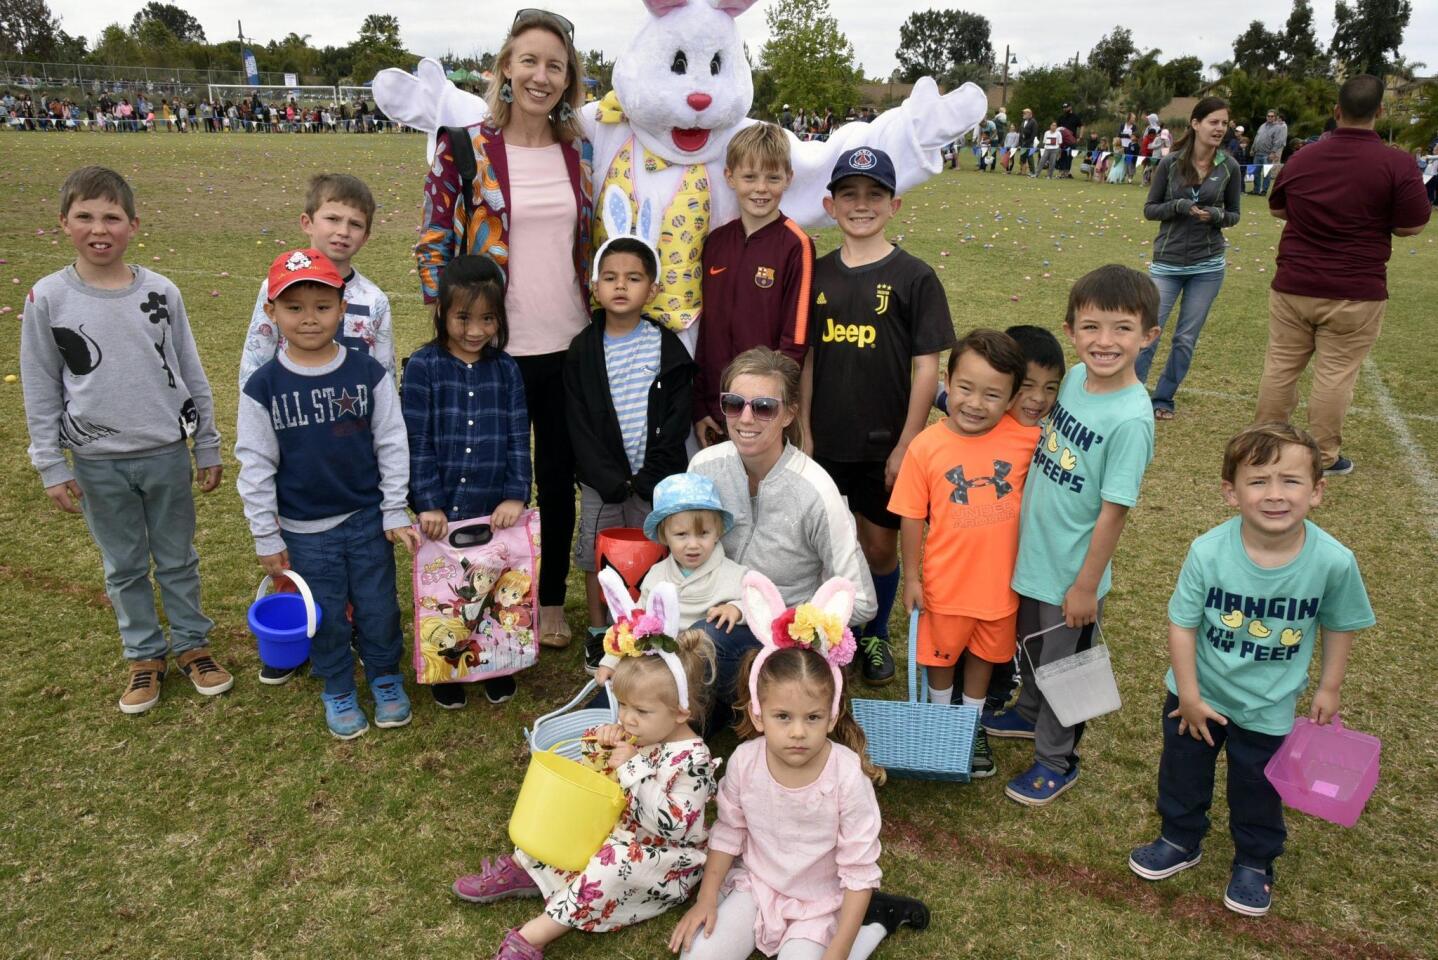 Encinitas Mayor Catherine S. Blakespear and the Easter Bunny, with some of the many children waiting to hunt for eggs